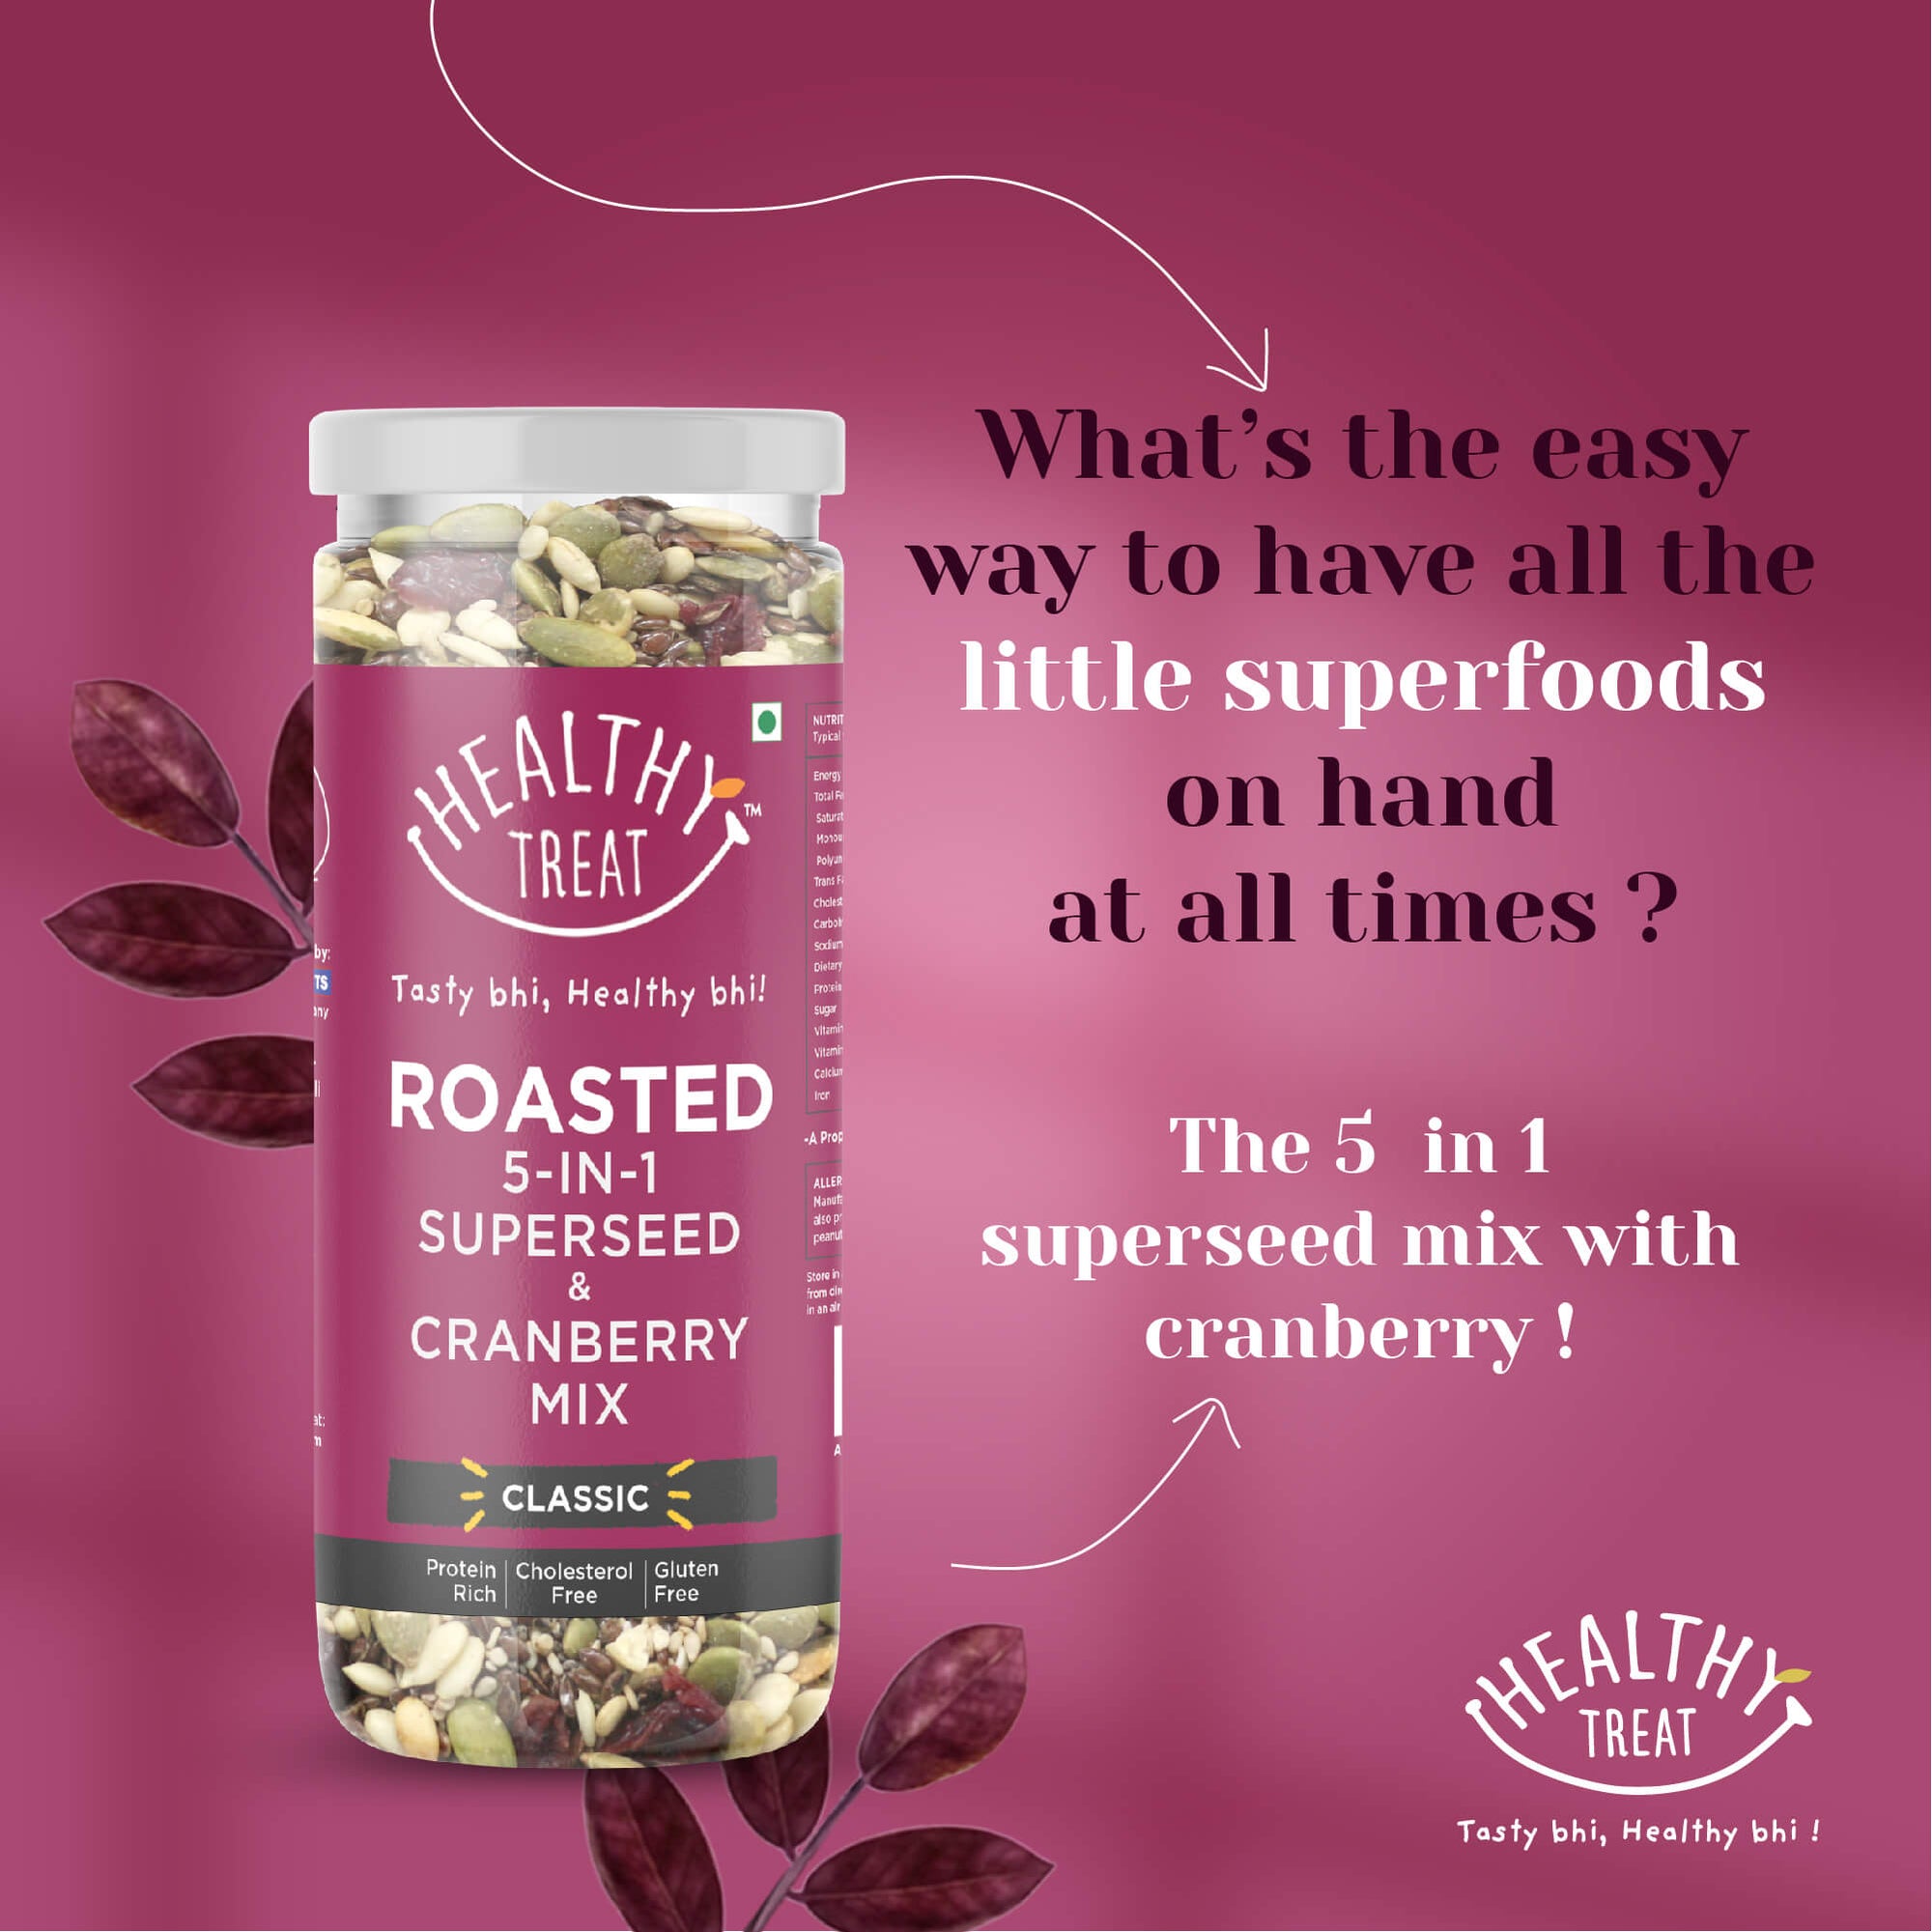 Healthy Treat Roasted 5 in 1 Superseed mix or mixed seeds classic with cranberries is protein rich and rich in antioxidants. It's a blend of roasted watermelon seeds, flax seeds, sesame seeds, chia seeds and pumpkin seeds and dried cranberries